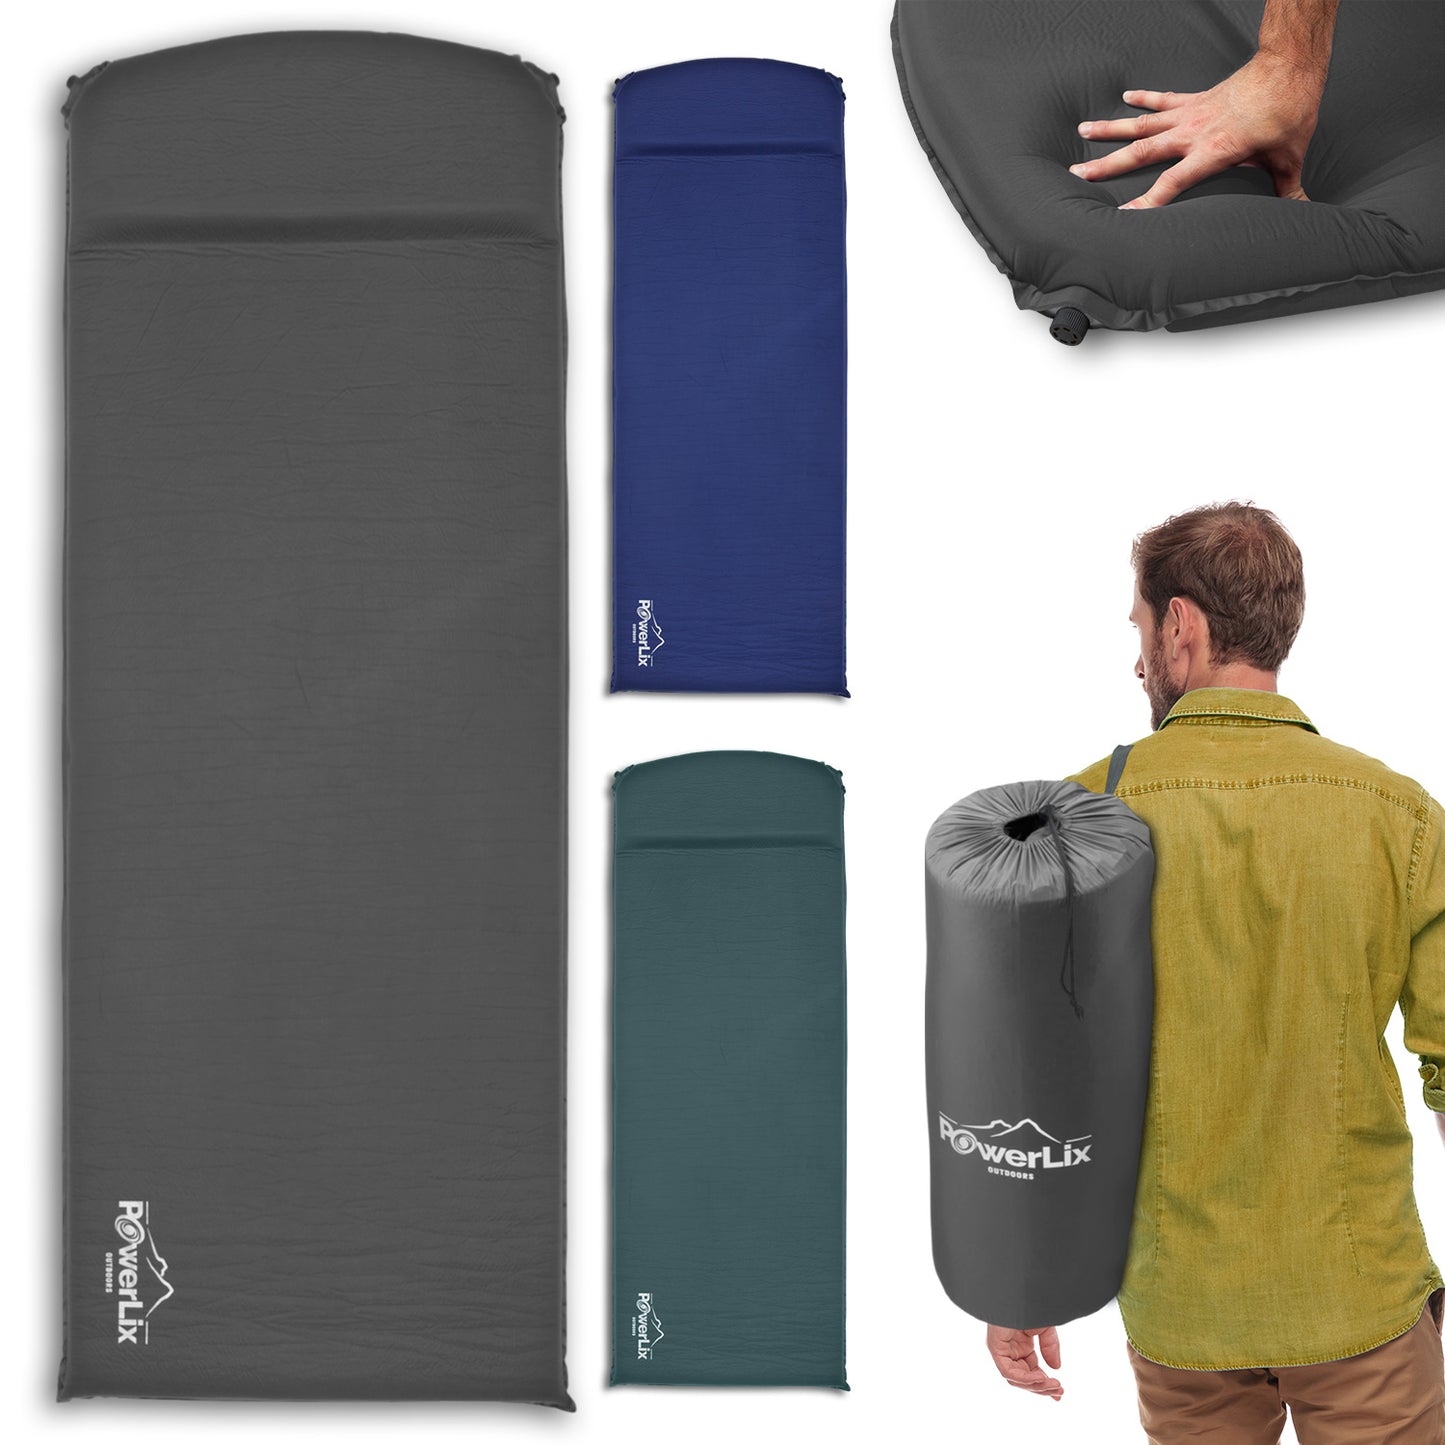 Three Powerlix Sleeping Pads with Self-Inflating Foam Pads displayed in gray, blue, and green. A model shwoign one stored in its bad and hung over his shoulder. Another is shown being pressed on by a hand to demonstrate softness.